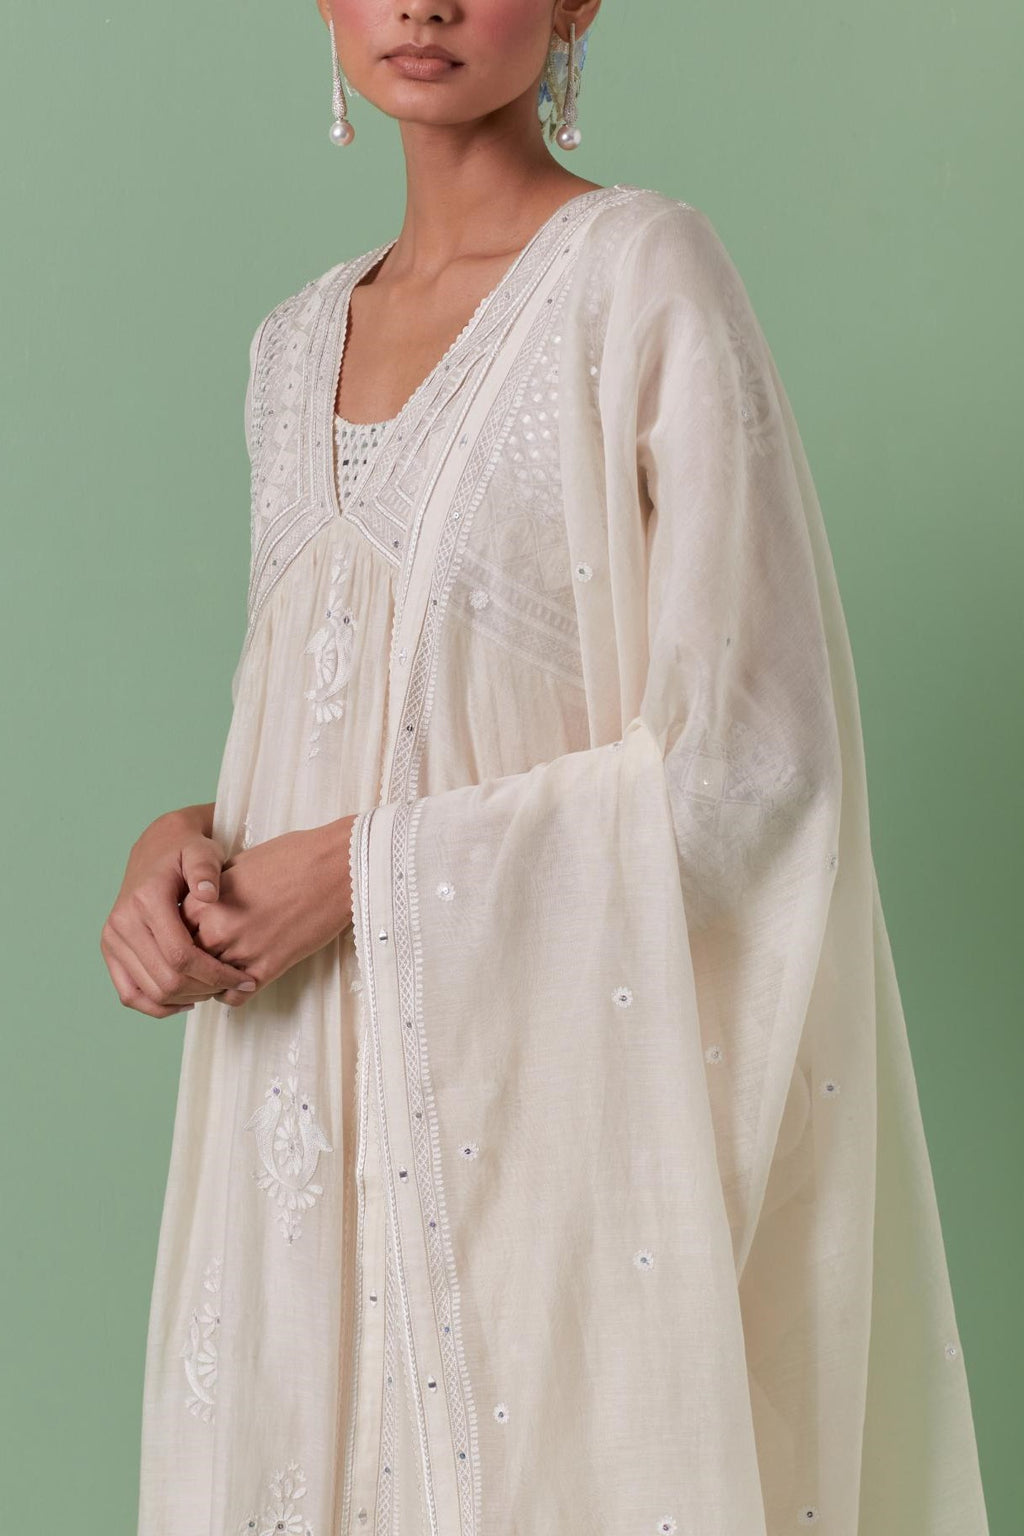 Off-white cotton chanderi dupatta with delicate silk thread embroidery, highlighted with braids, mirrors and sequins work.